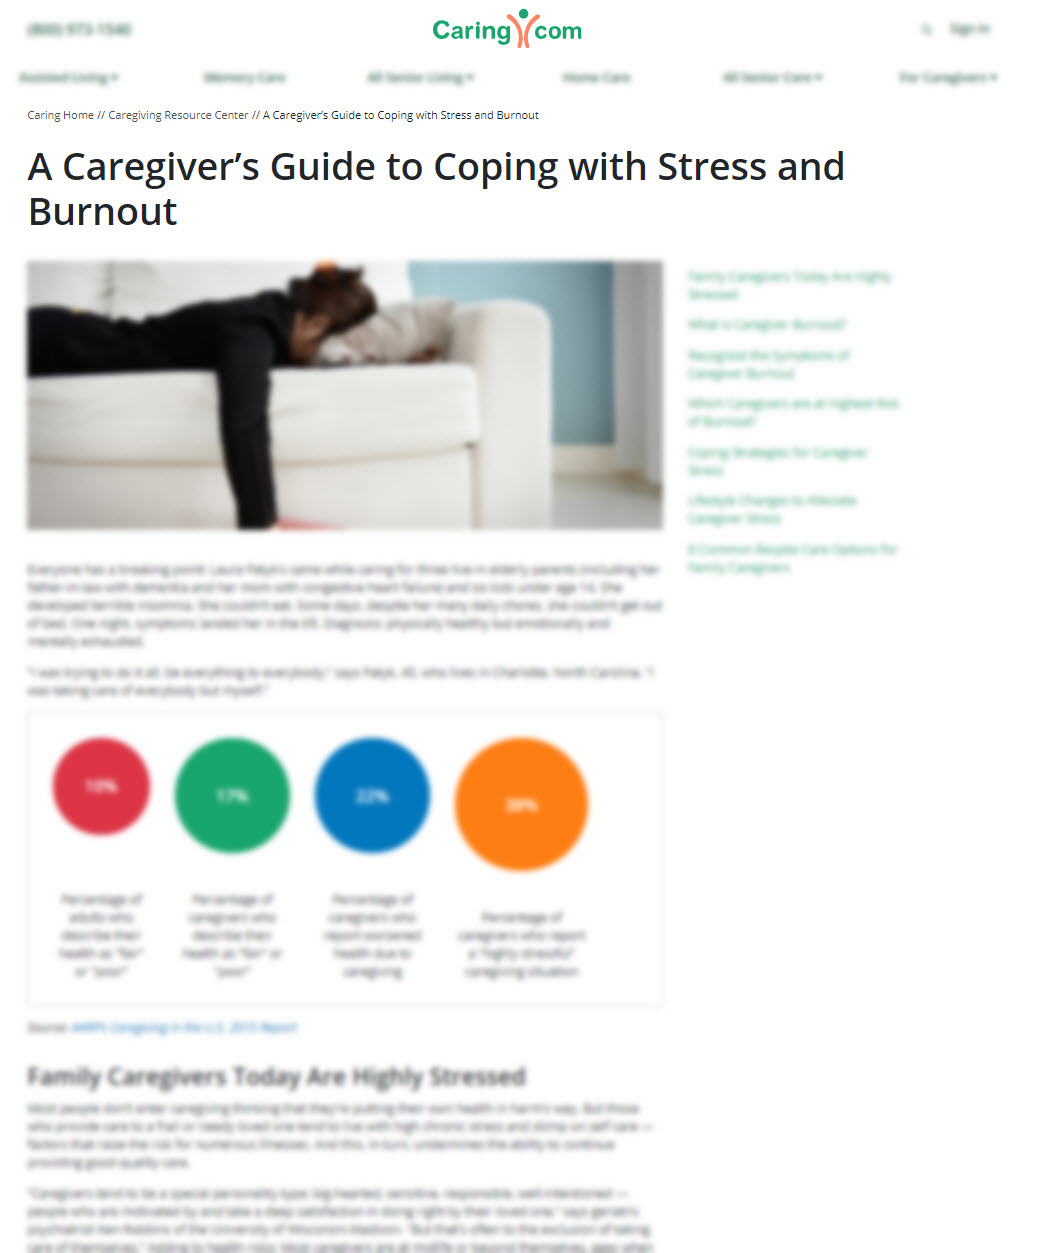 A Caregiver’s Guide to Coping with Stress and Burnout